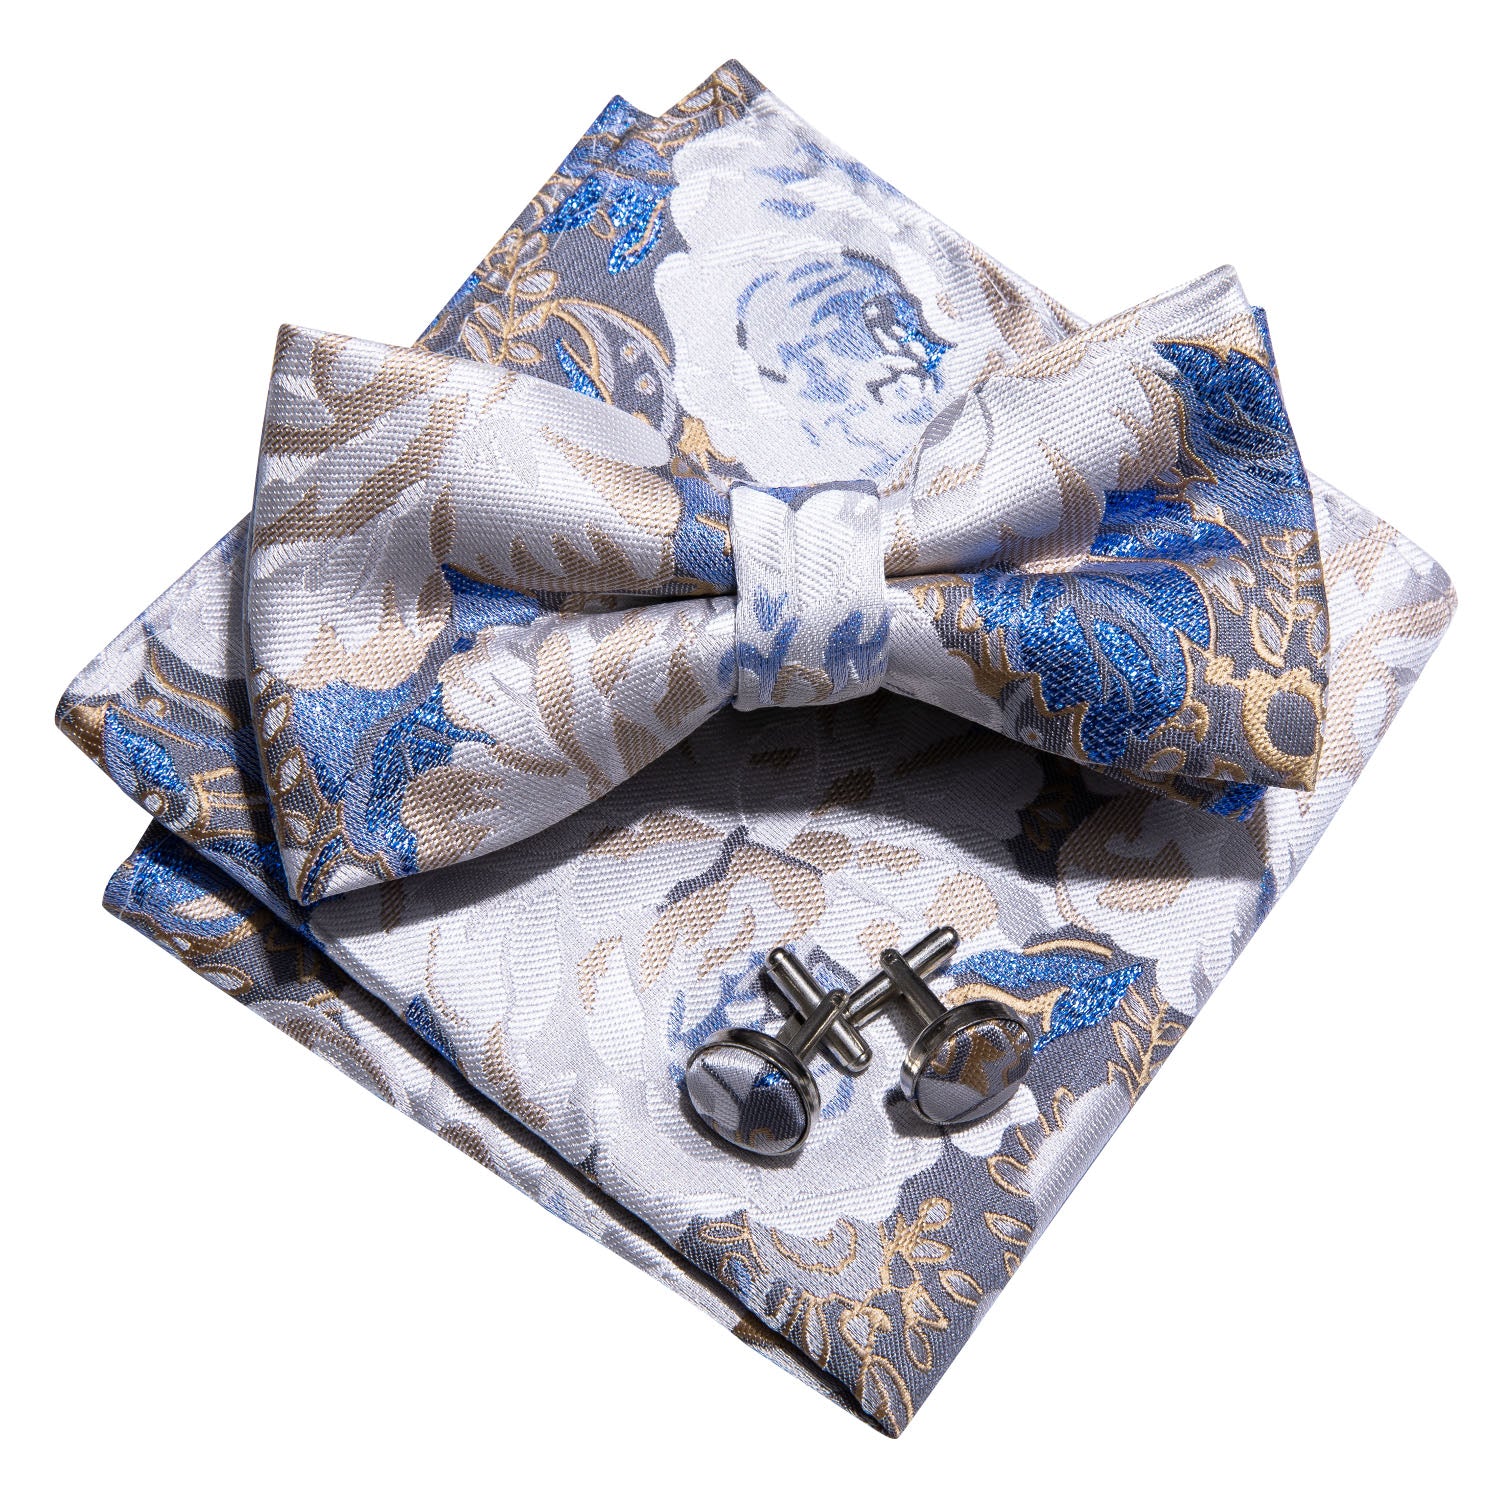 Barry.wang White Tie Blue Floral Pre-tied Bow Tie Hanky Cufflinks Set